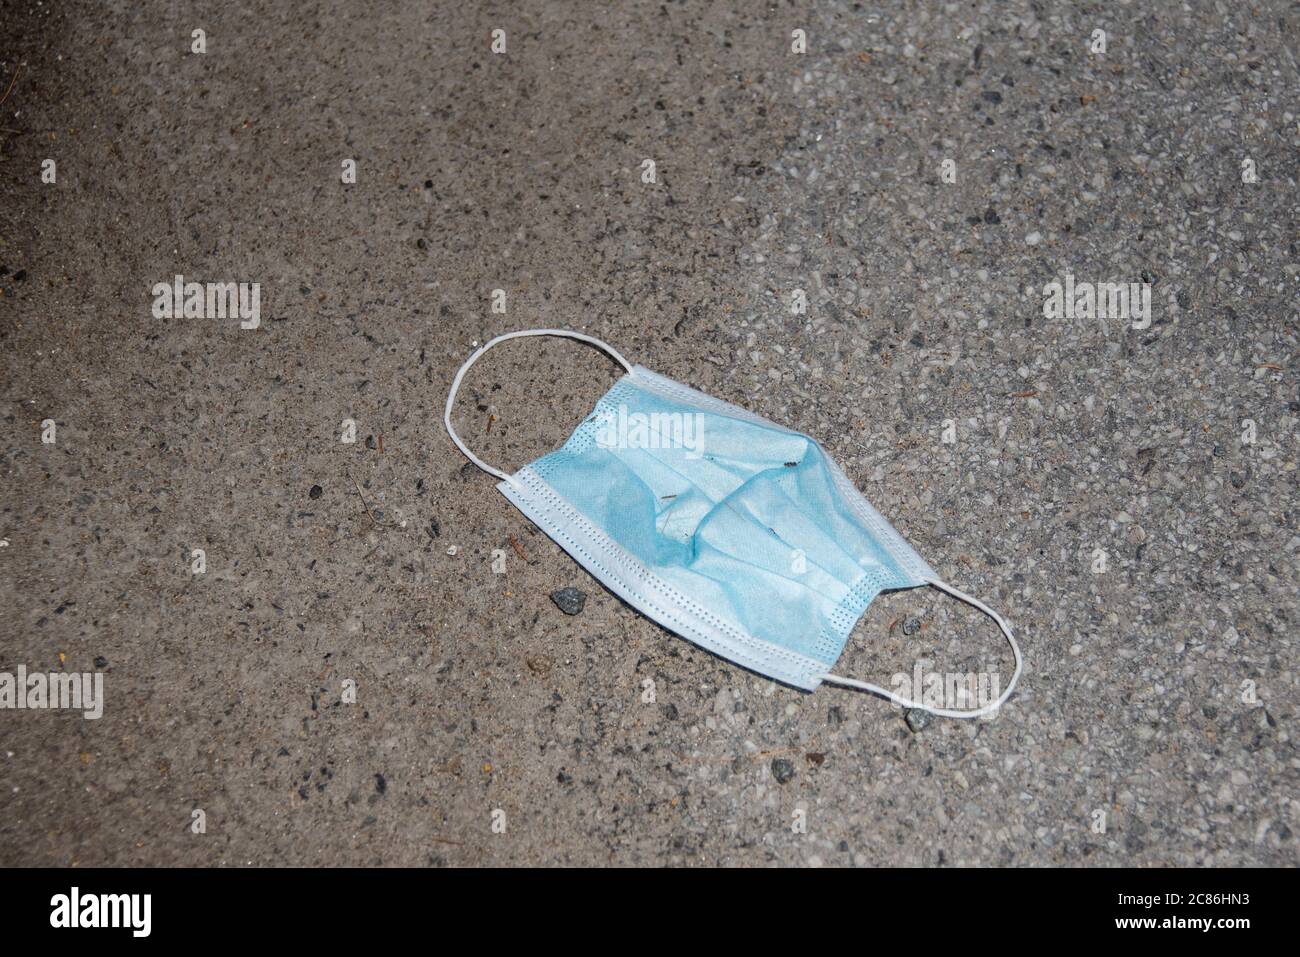 A used disposable face mast discarded in the gutter. Stock Photo